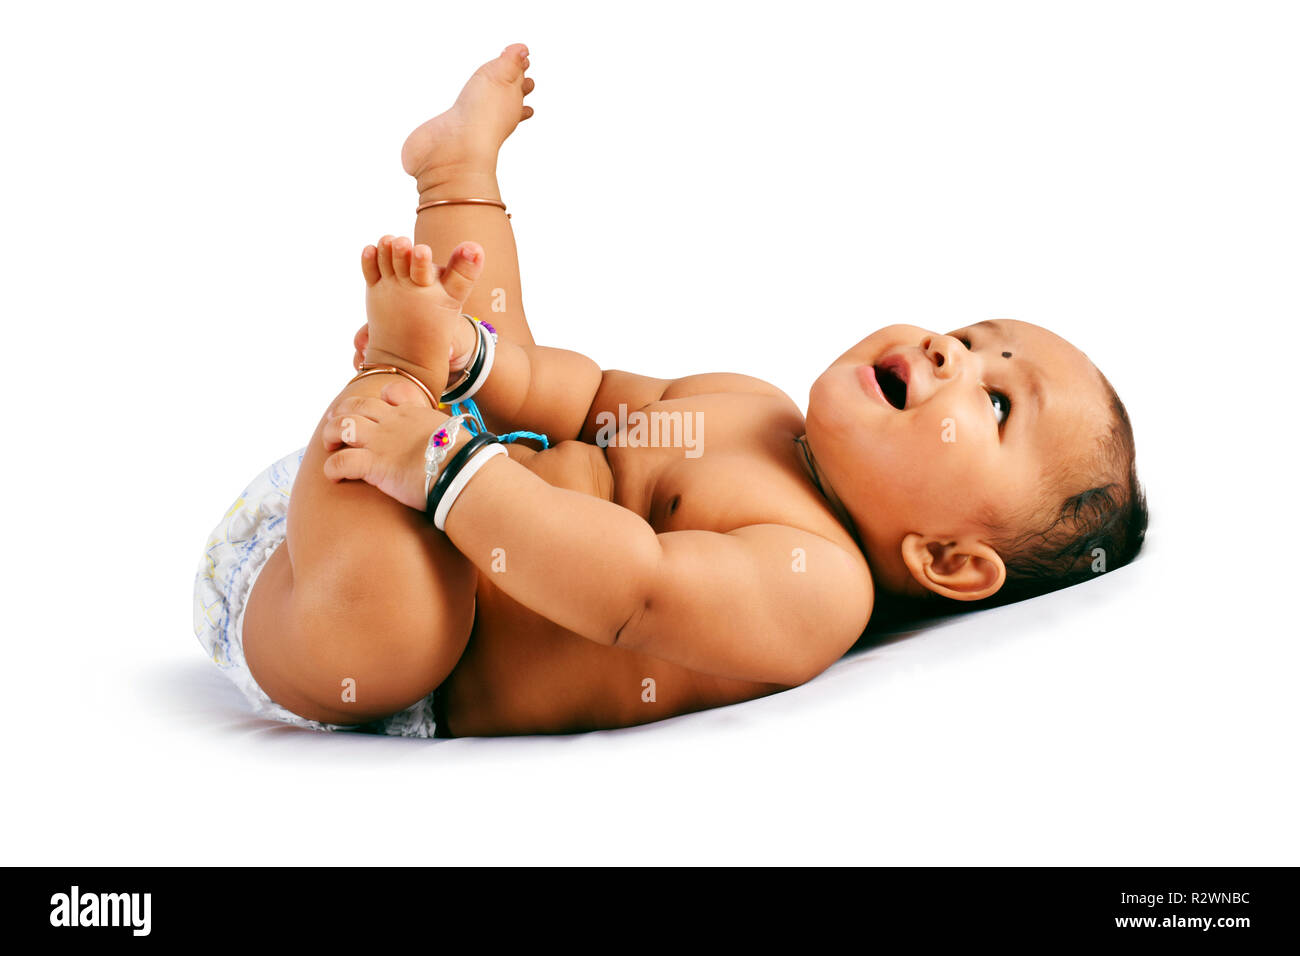 Cute baby sleeping on bed holding ses pieds et riant, Pune, Maharashtra. Banque D'Images